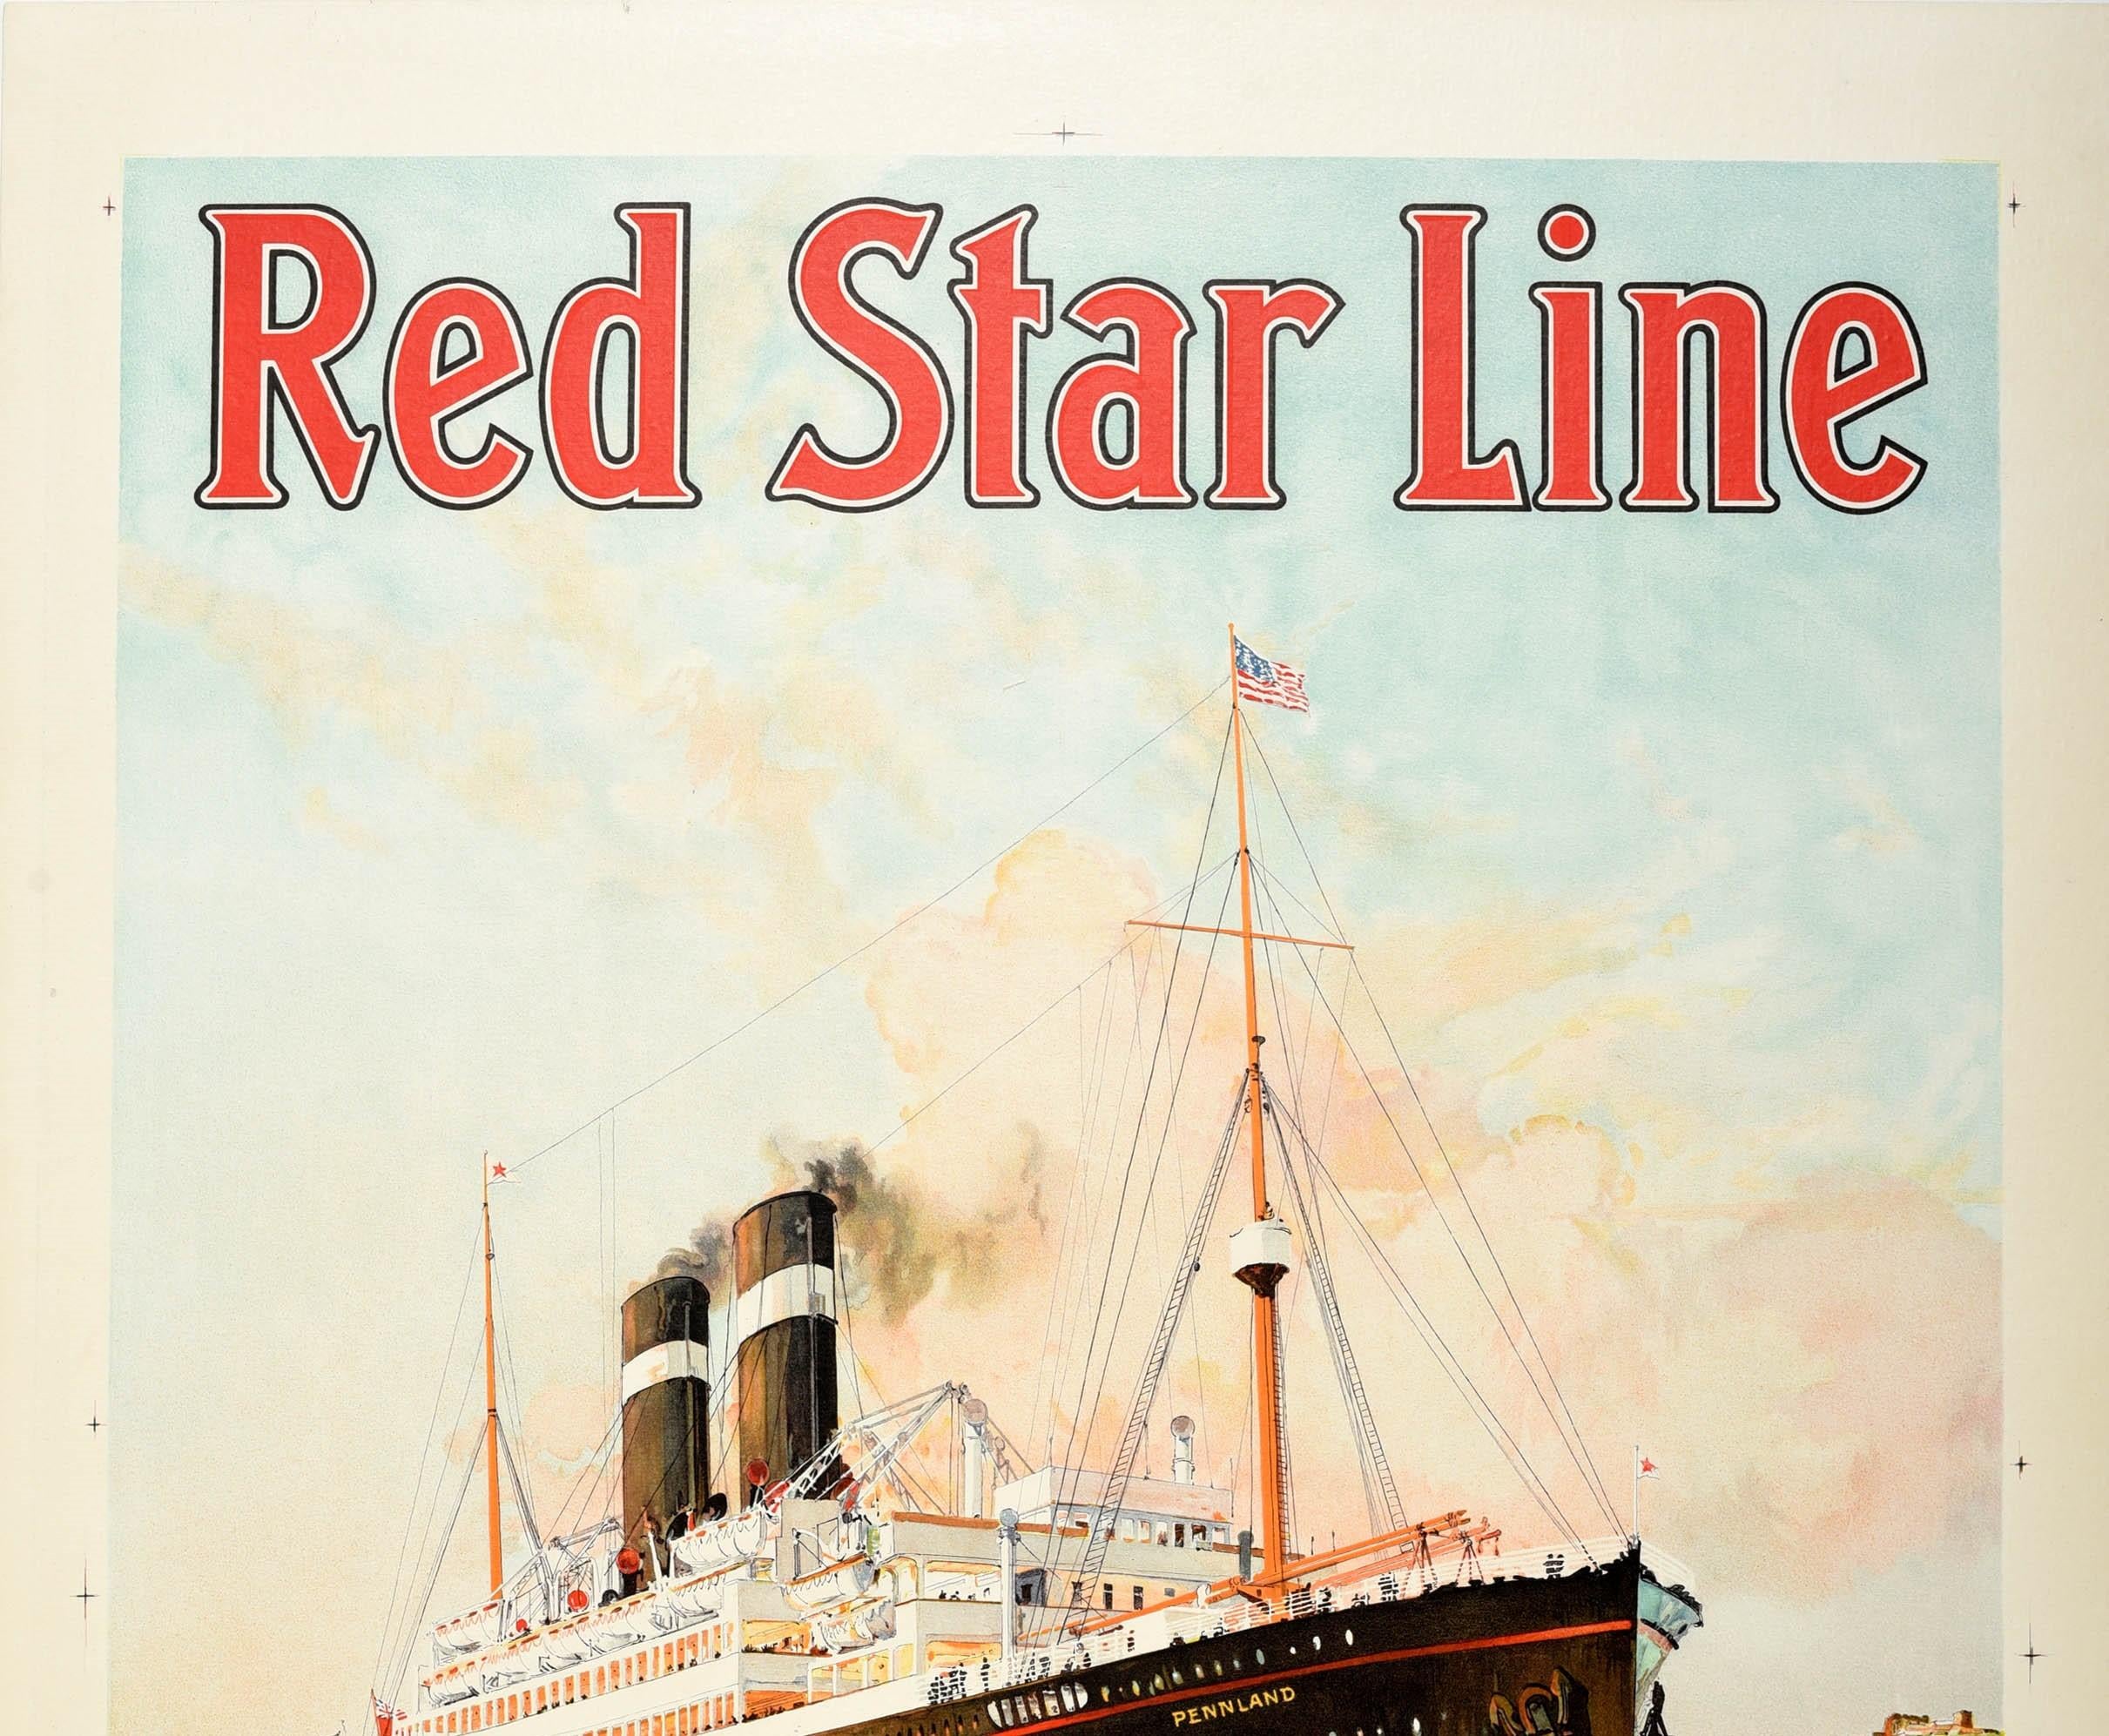 Original vintage travel advertising poster for Red Star Line featuring stunning artwork by Charles Edward Dixon (1872-1934) of the SS Pennland cruise ship sailing in front of white cliffs with sailing boats by the coast and a tug boat named